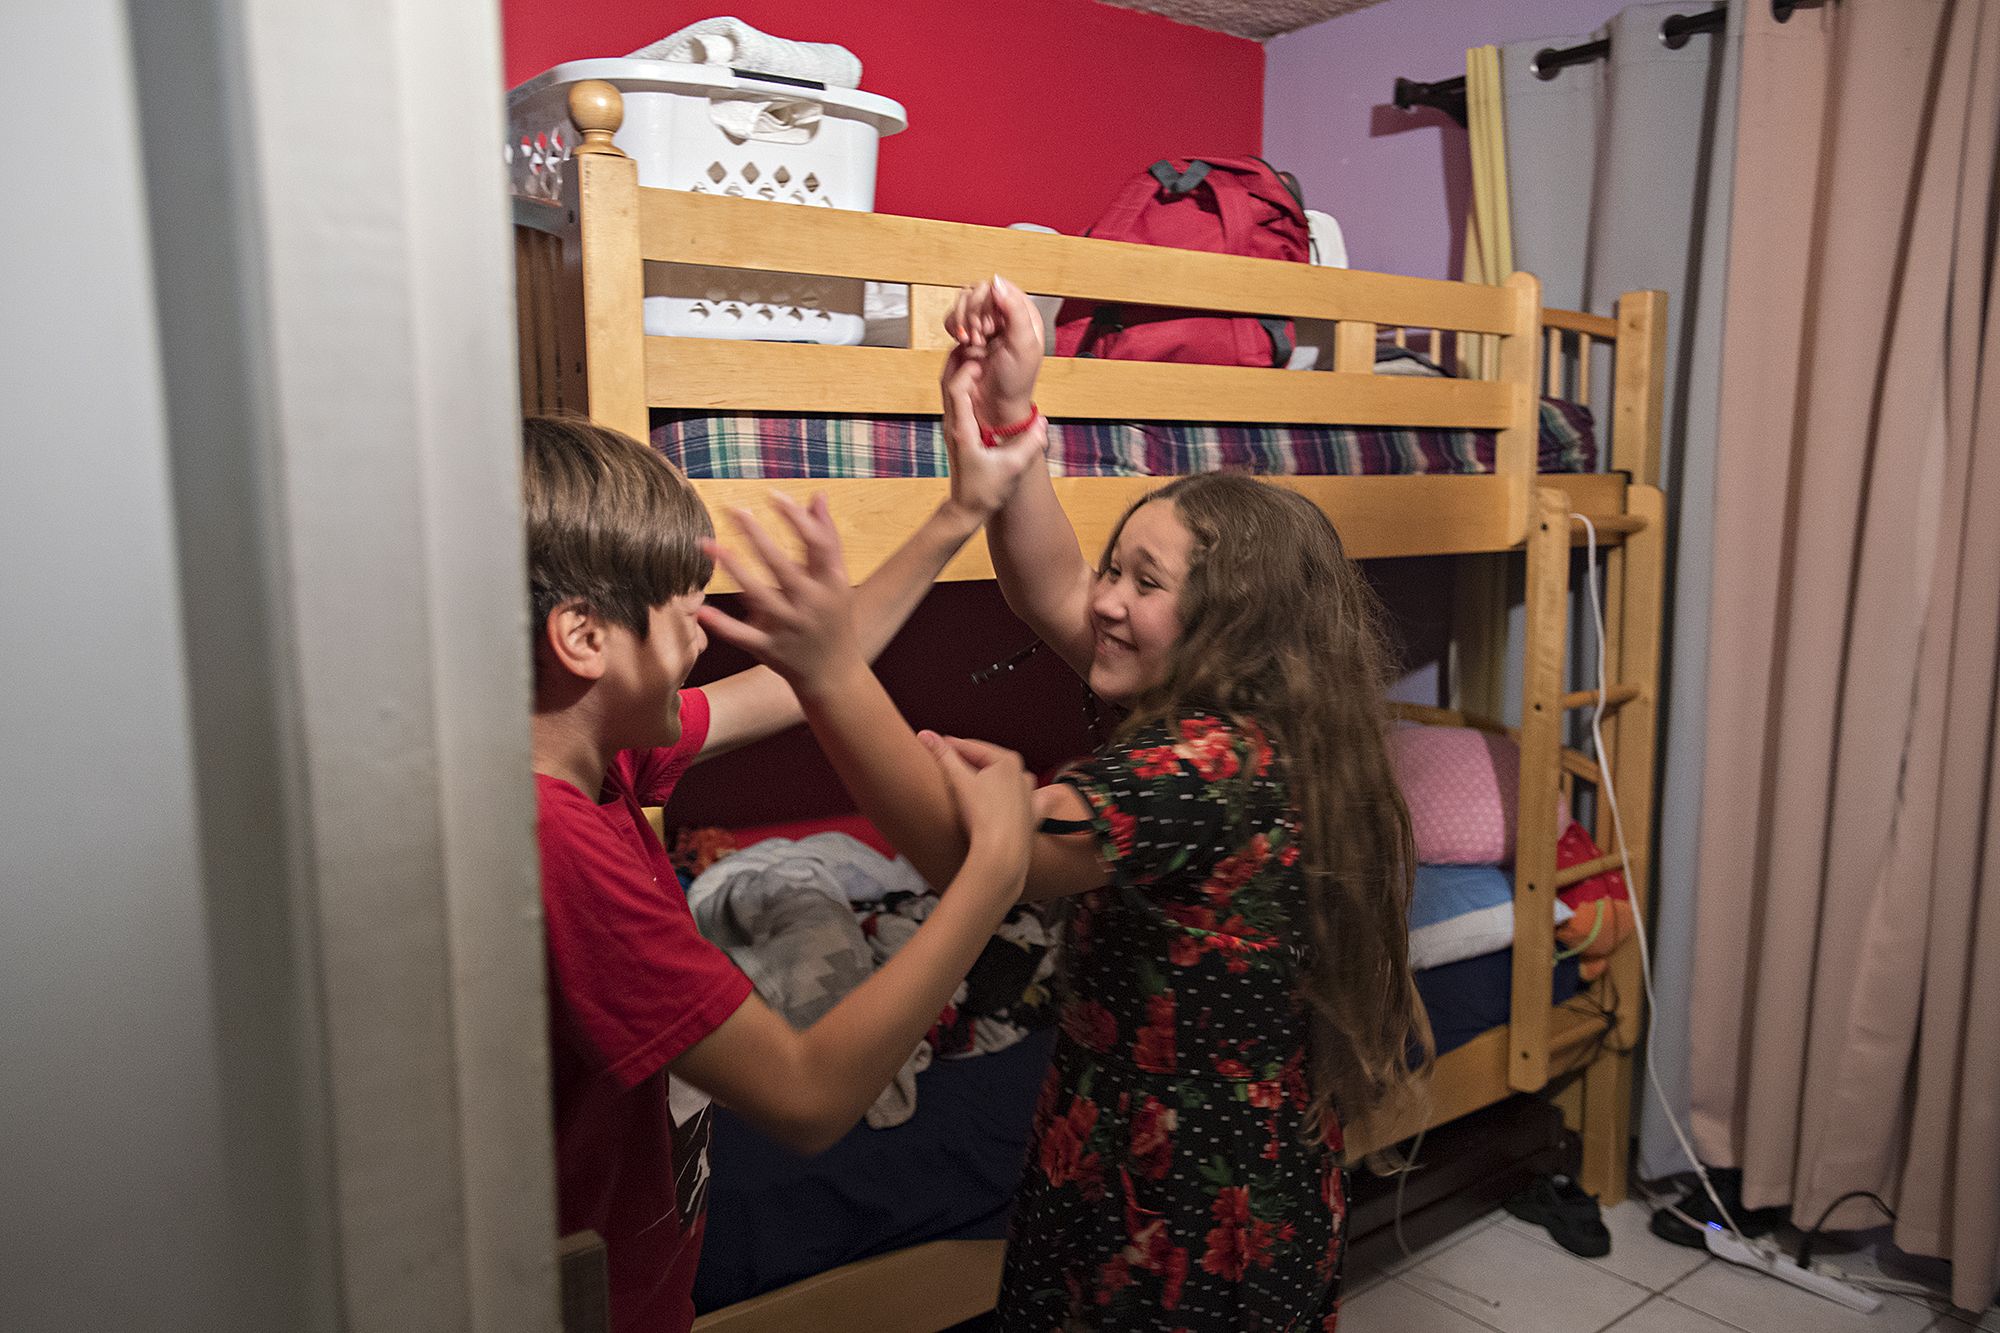 Edward Flores, left, and his sister, Rayma, playfully wrestle in the children’s bedroom as they get restless waiting for Thanksgiving dinner. The combination of rainy weather and their parents’ neighborhood safety concerns had kept them cooped up in the small, two-bedroom apartment in Tijuana, Mexico, for the majority of the day. Image by Amanda Cowan. Mexico, 2019.